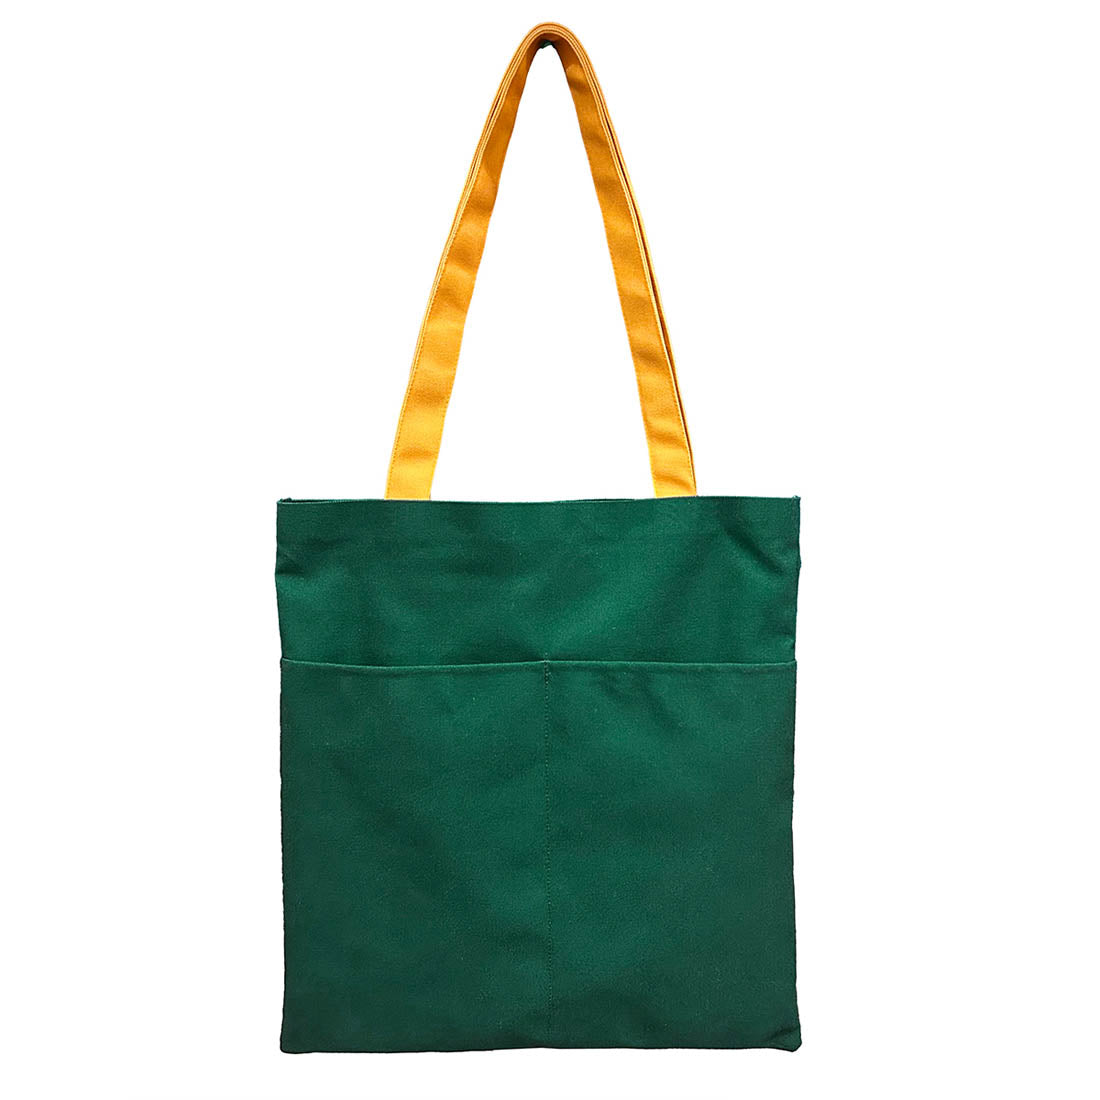 Green and yellow tote bag with a yellow pocket, perfect for carrying essentials in style.